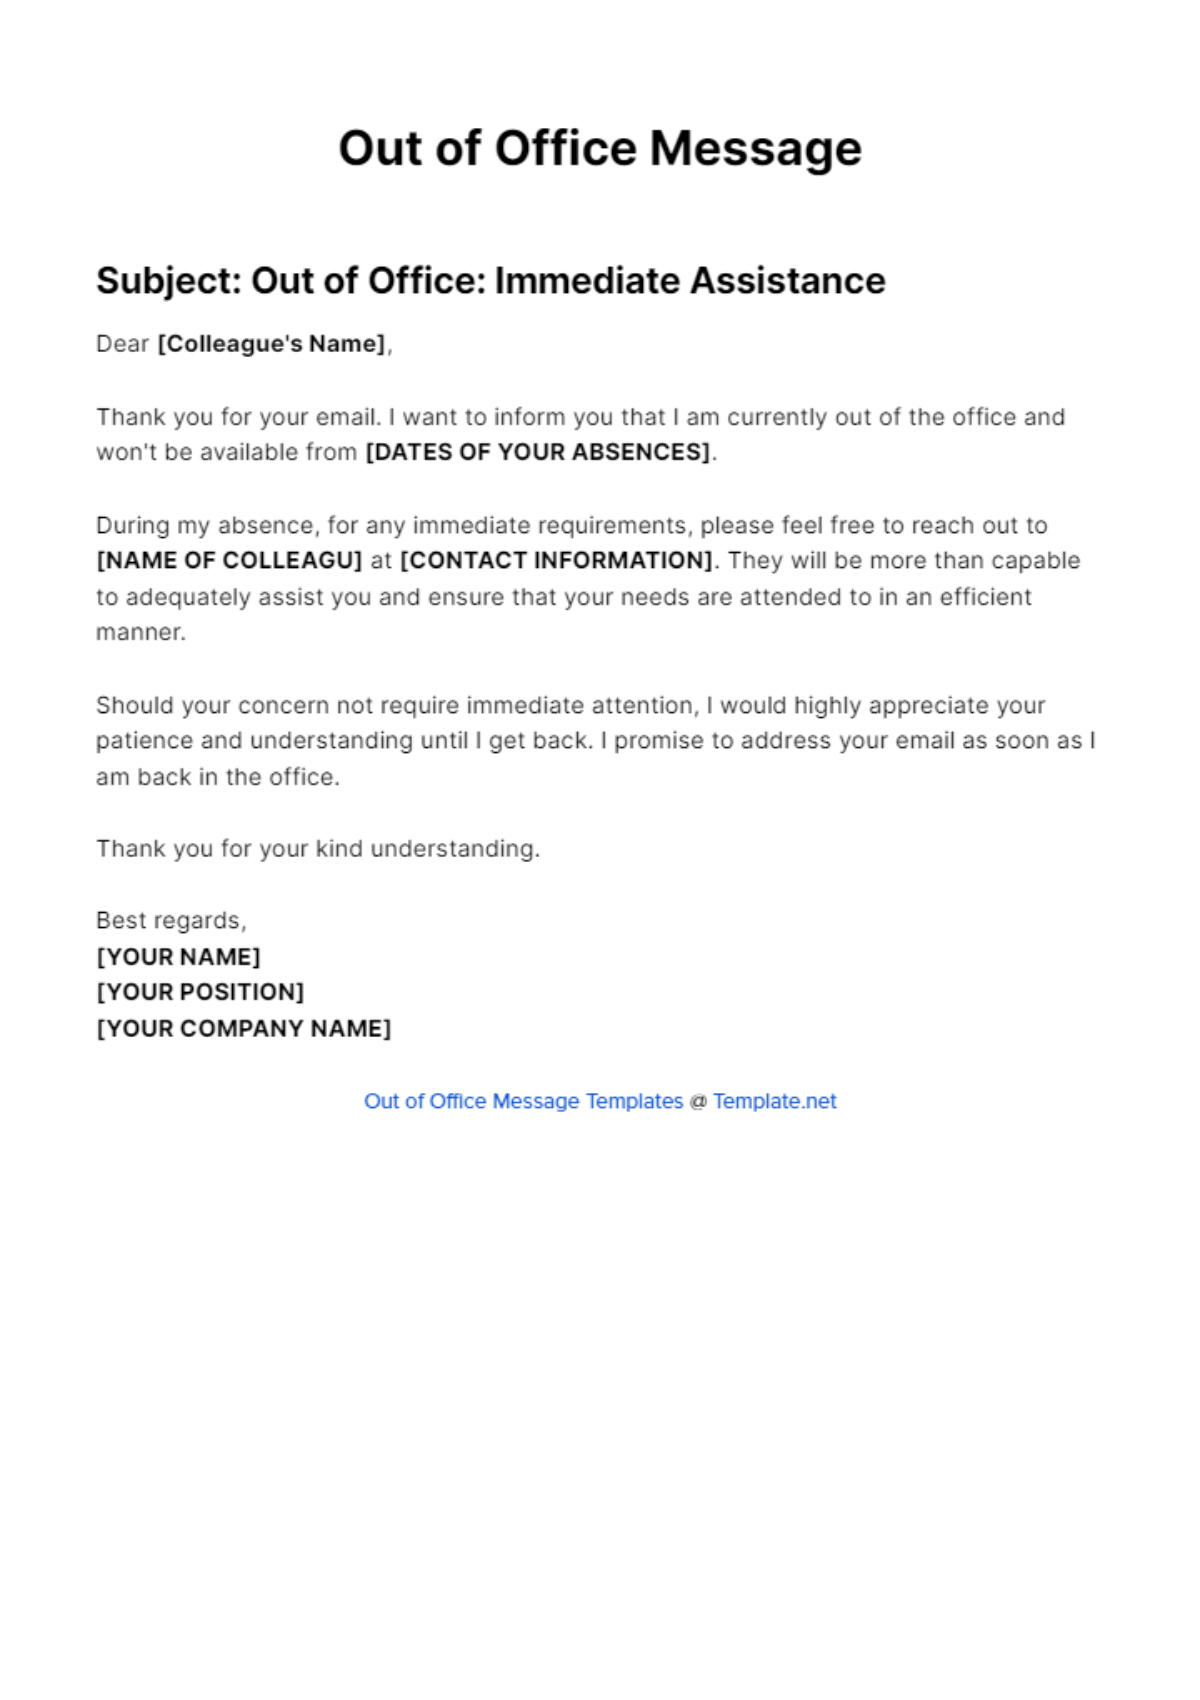 Free Out Of Office Message For Immediate Assistance Template